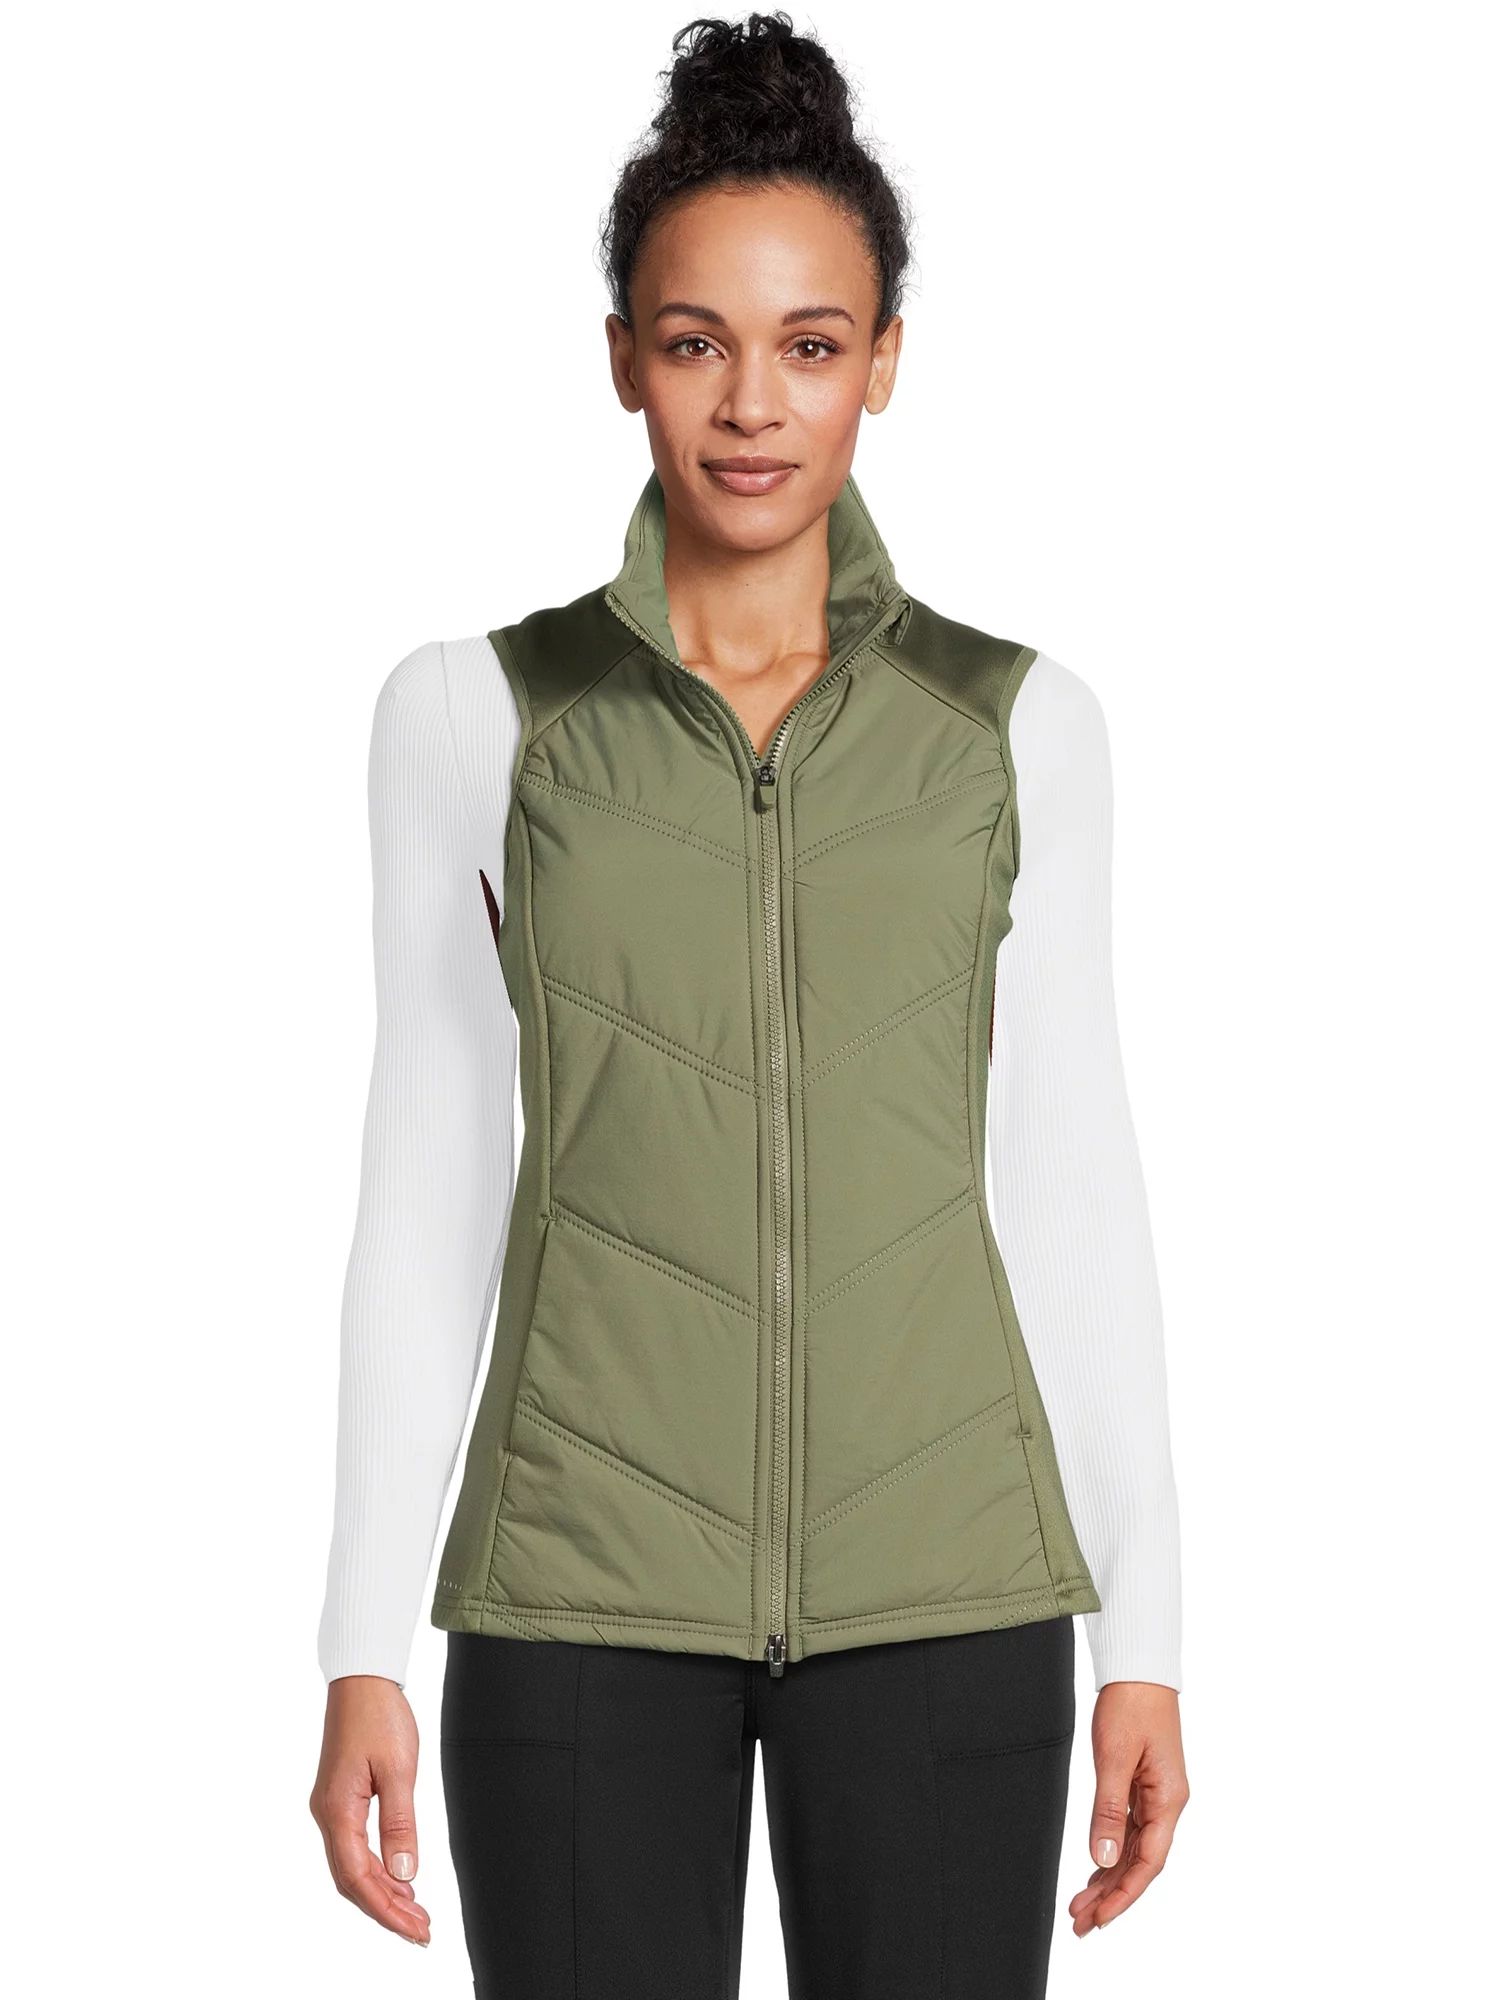 Avia Women’s Quilted Vest with Pockets, Sizes XS-3X | Walmart (US)